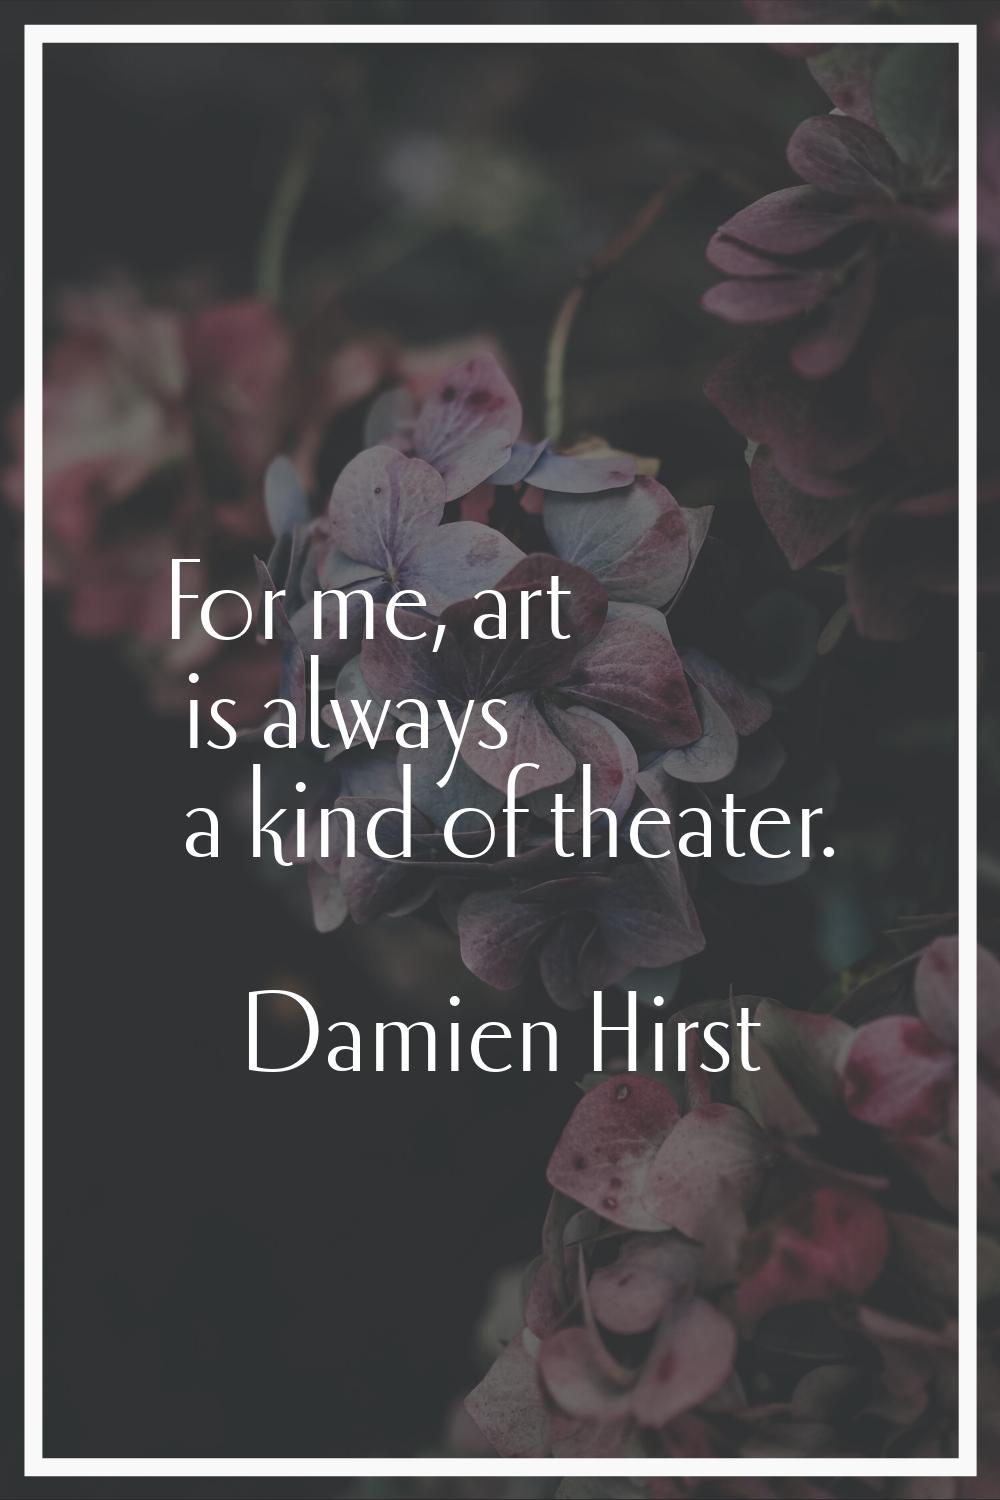 For me, art is always a kind of theater.